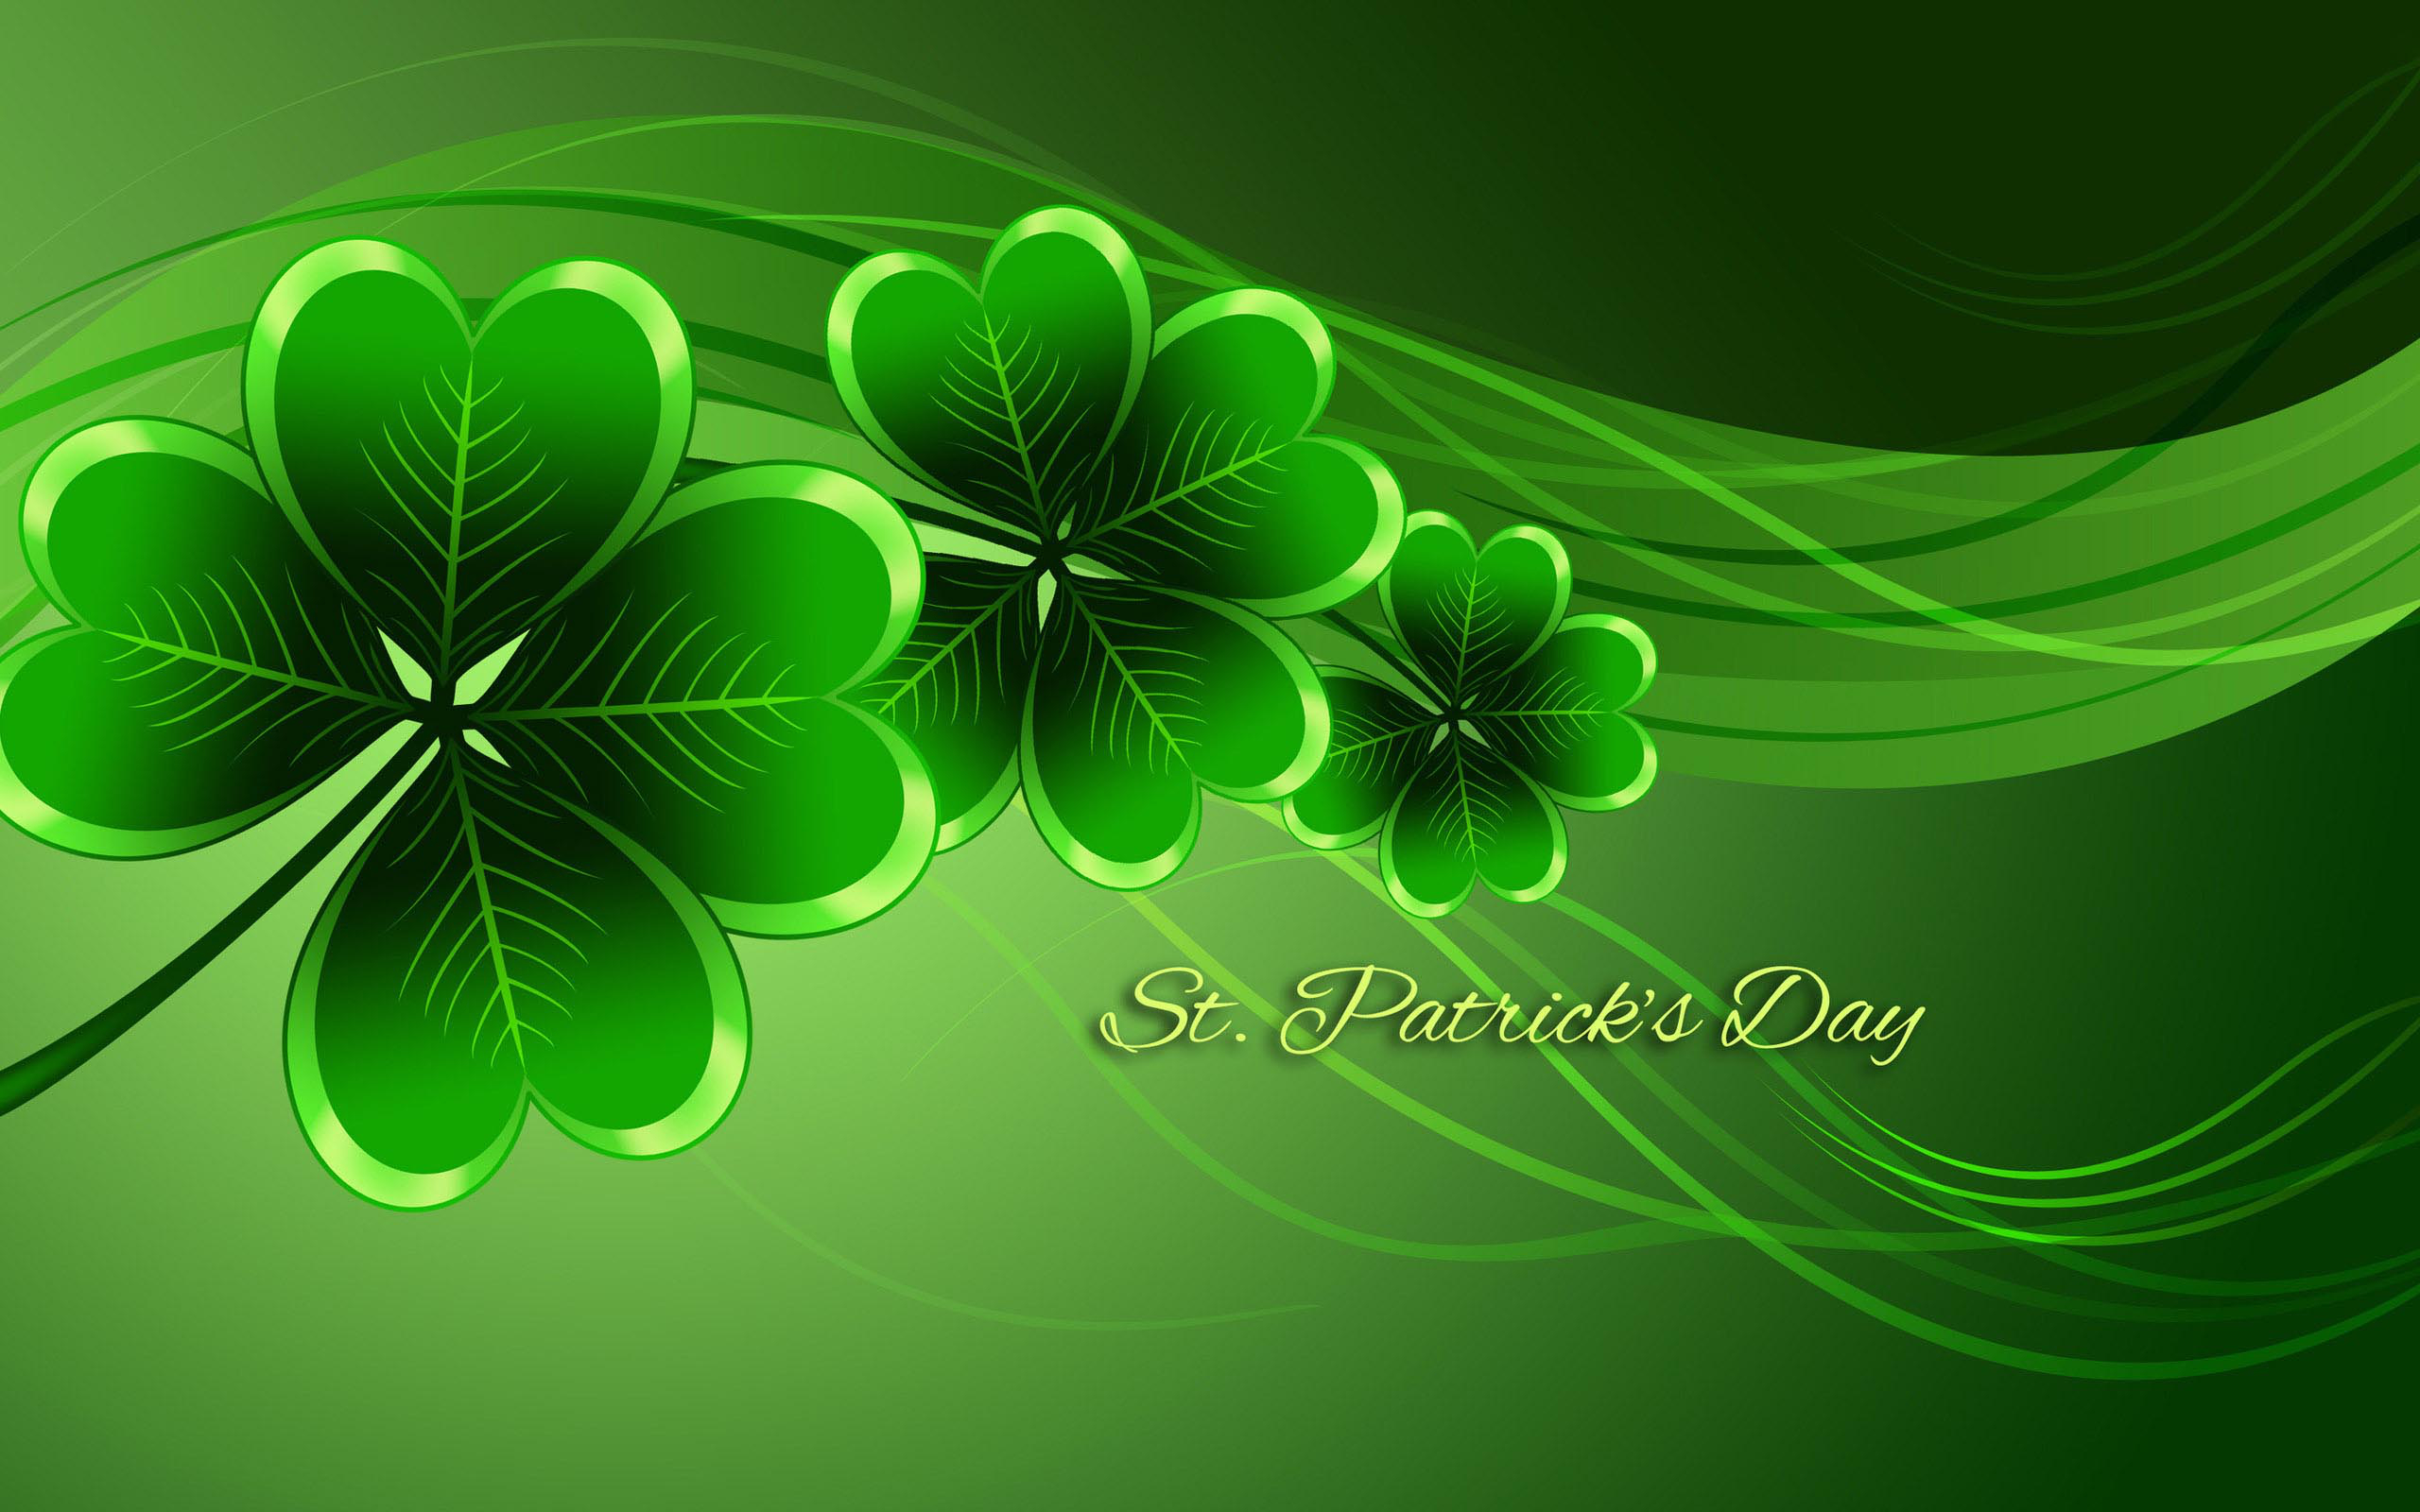 Best St Patricks Day Image Quotes Greetings Wishes